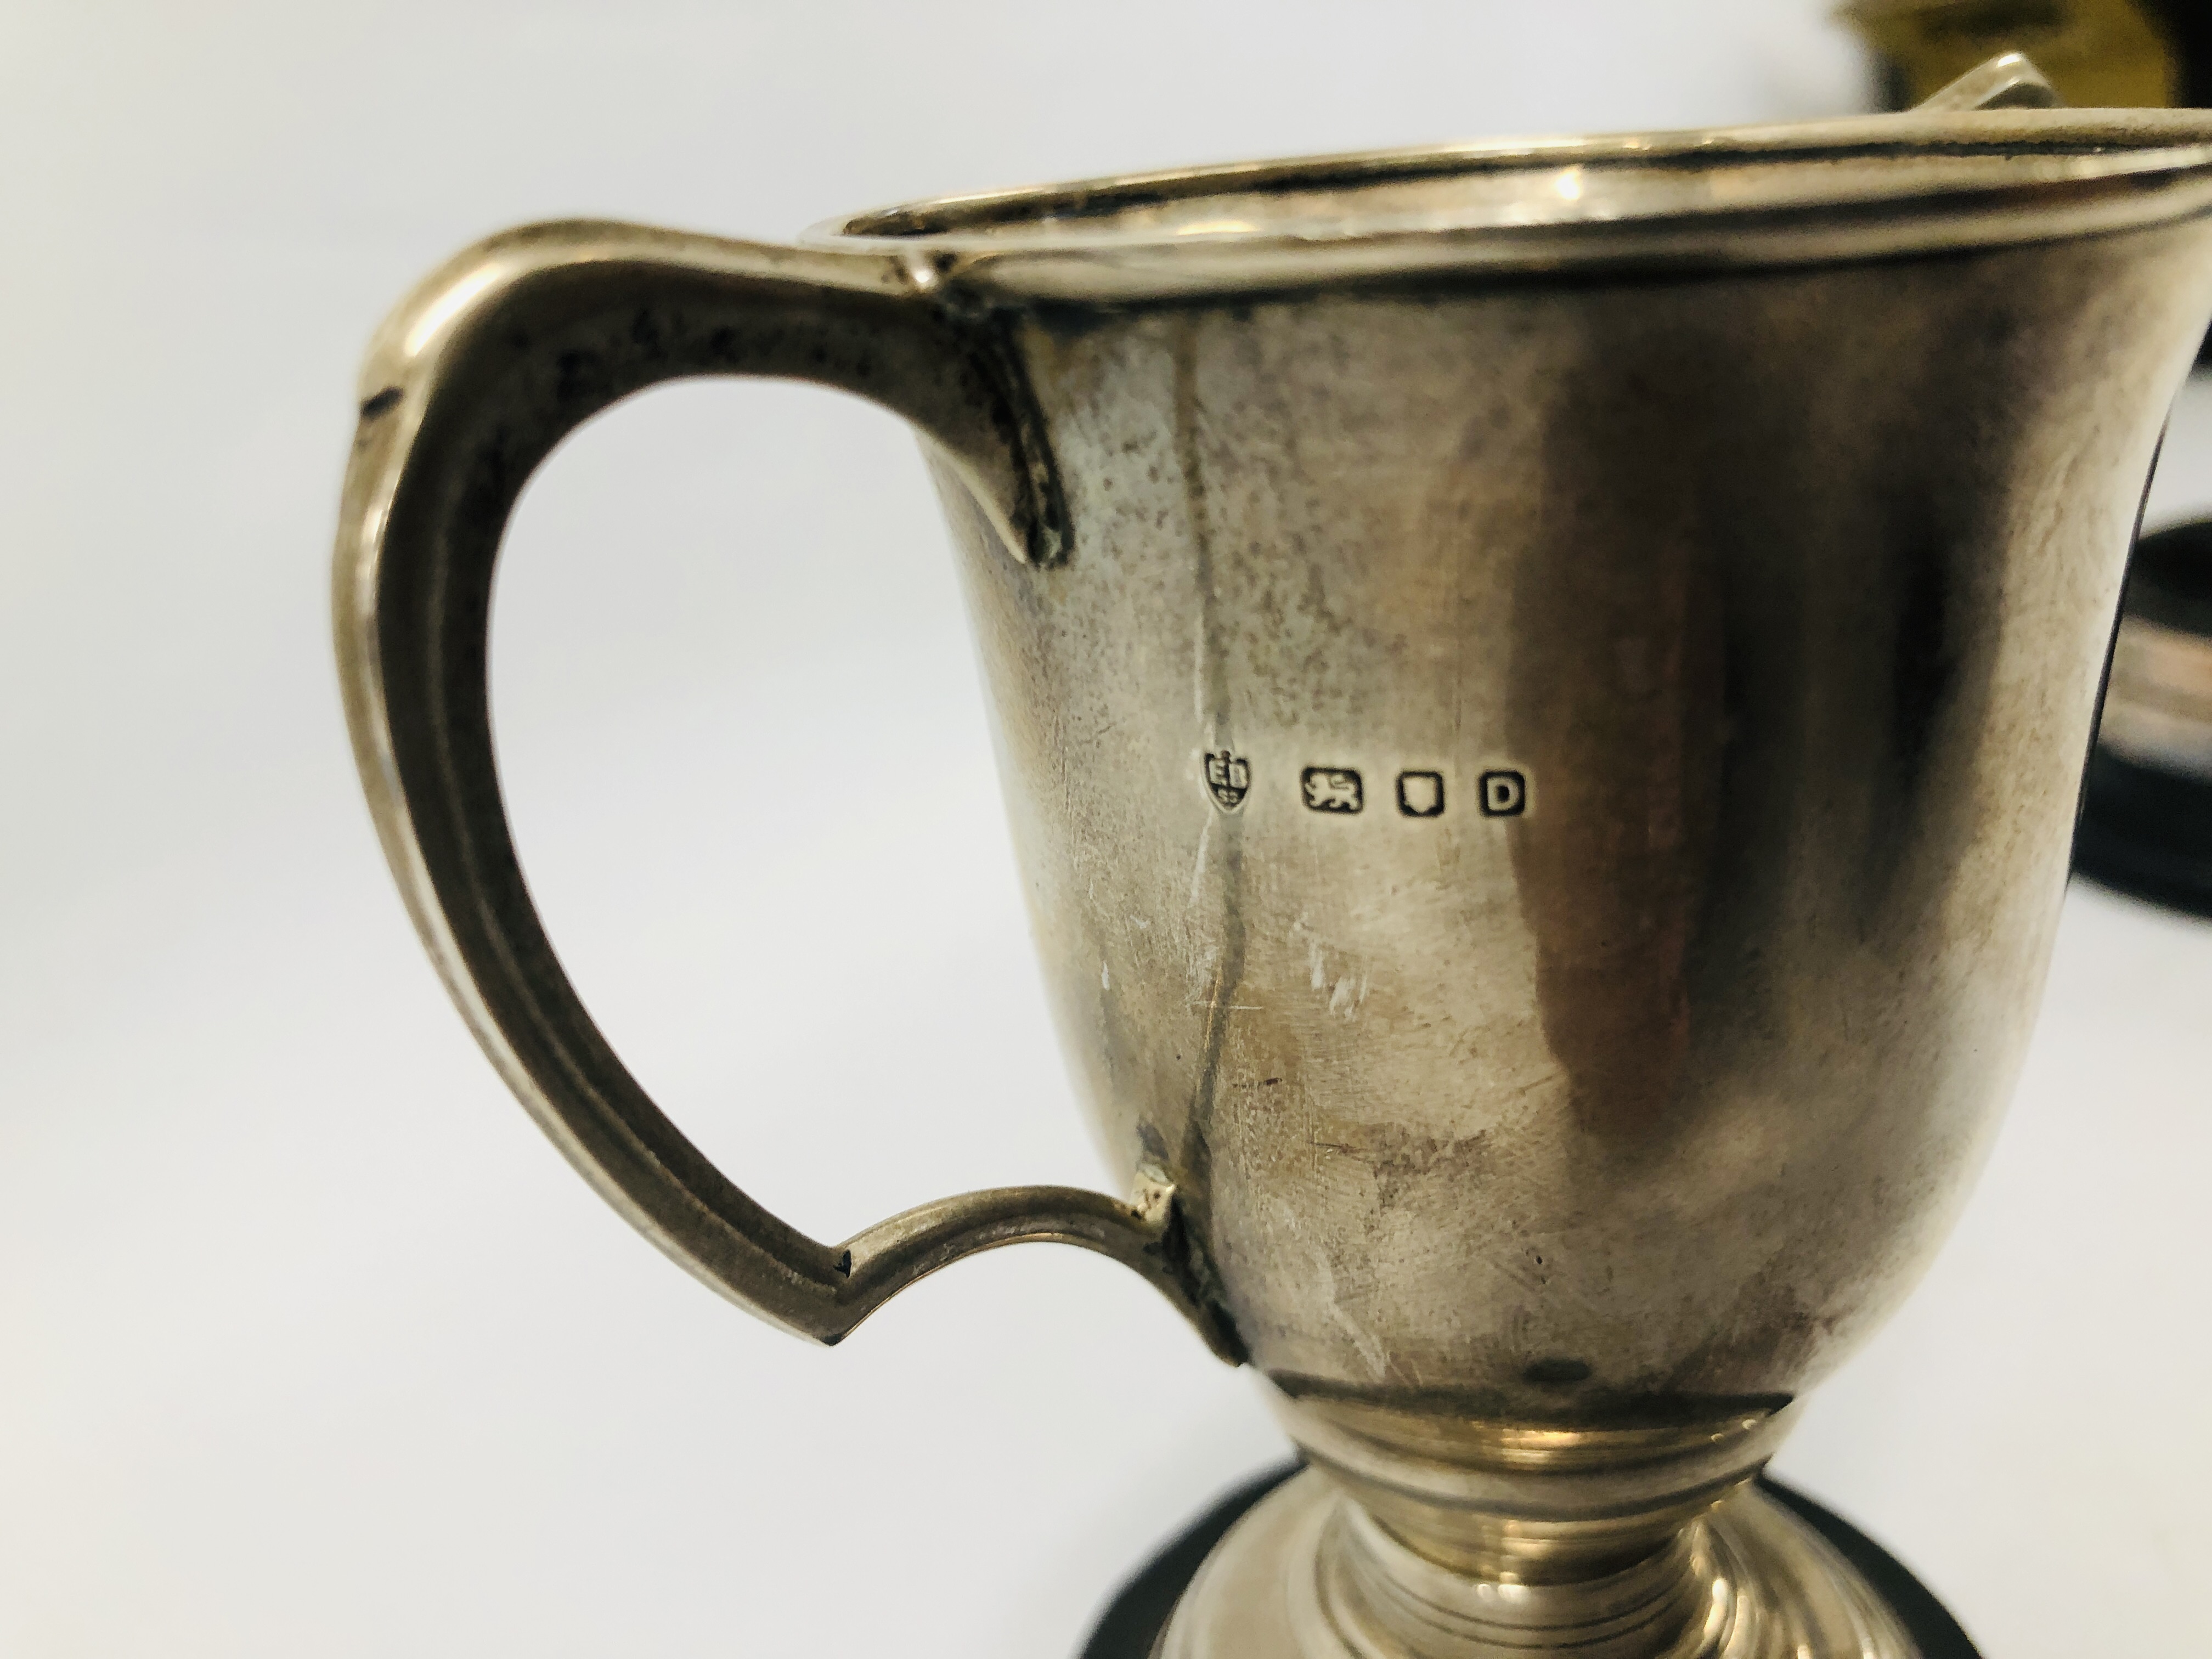 AN ANTIQUE TWO HANDLED SILVER PRESENTATION CUP BEARING INSCRIPTION RELATING TO THE PLATOON - Image 12 of 14